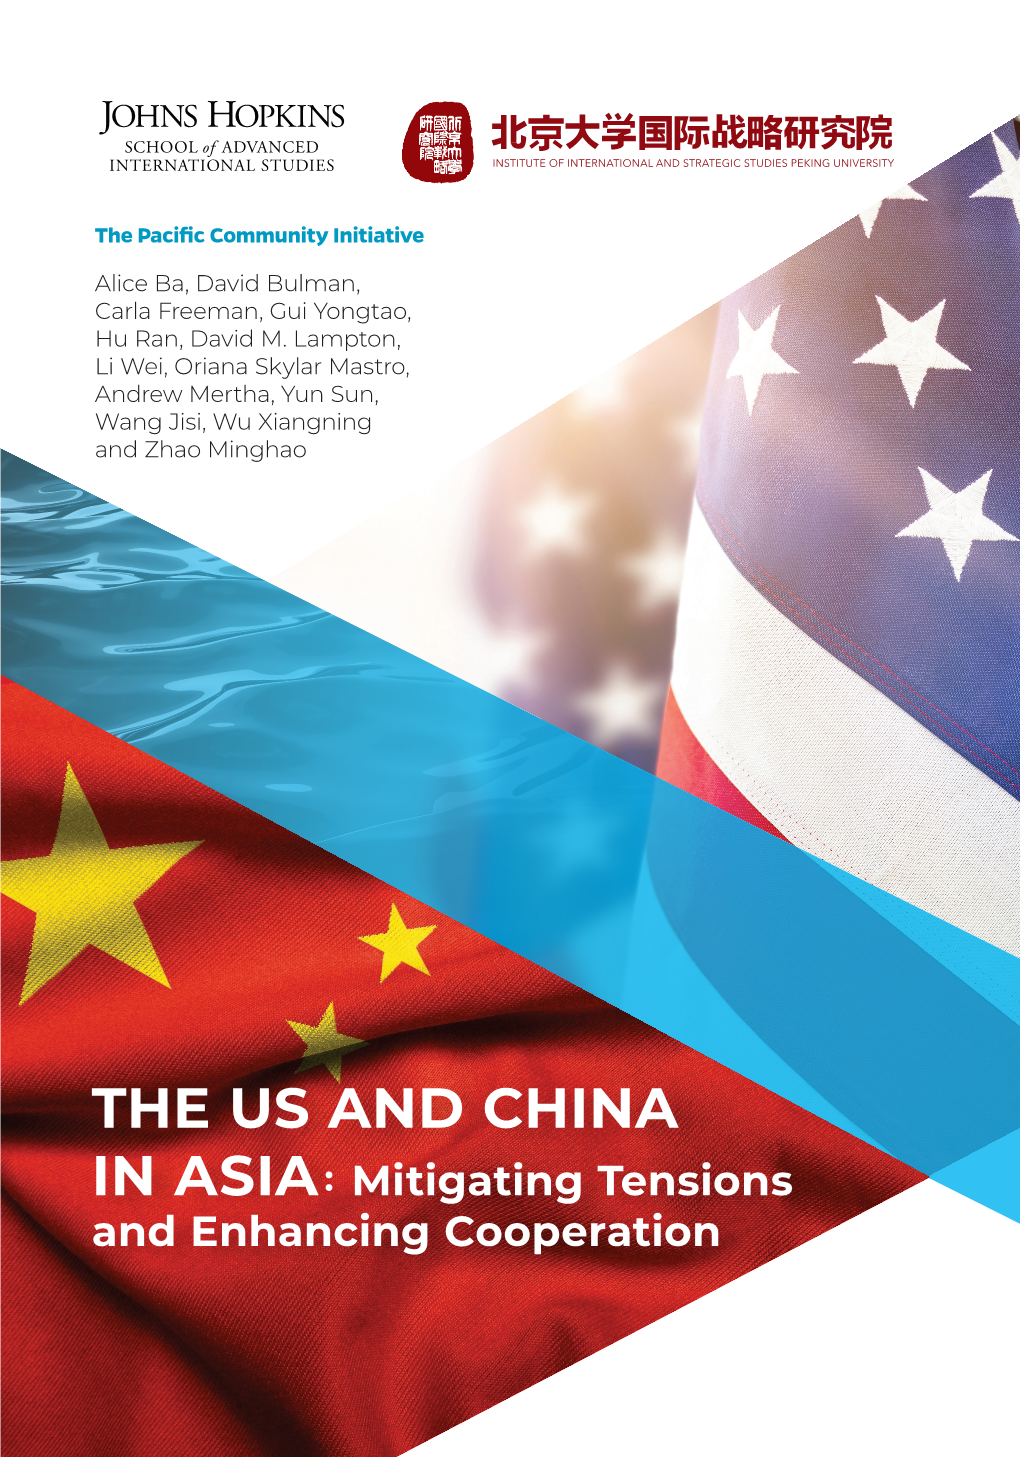 THE US and CHINA in ASIA : Mitigating Tensions and Enhancing Cooperation the U.S